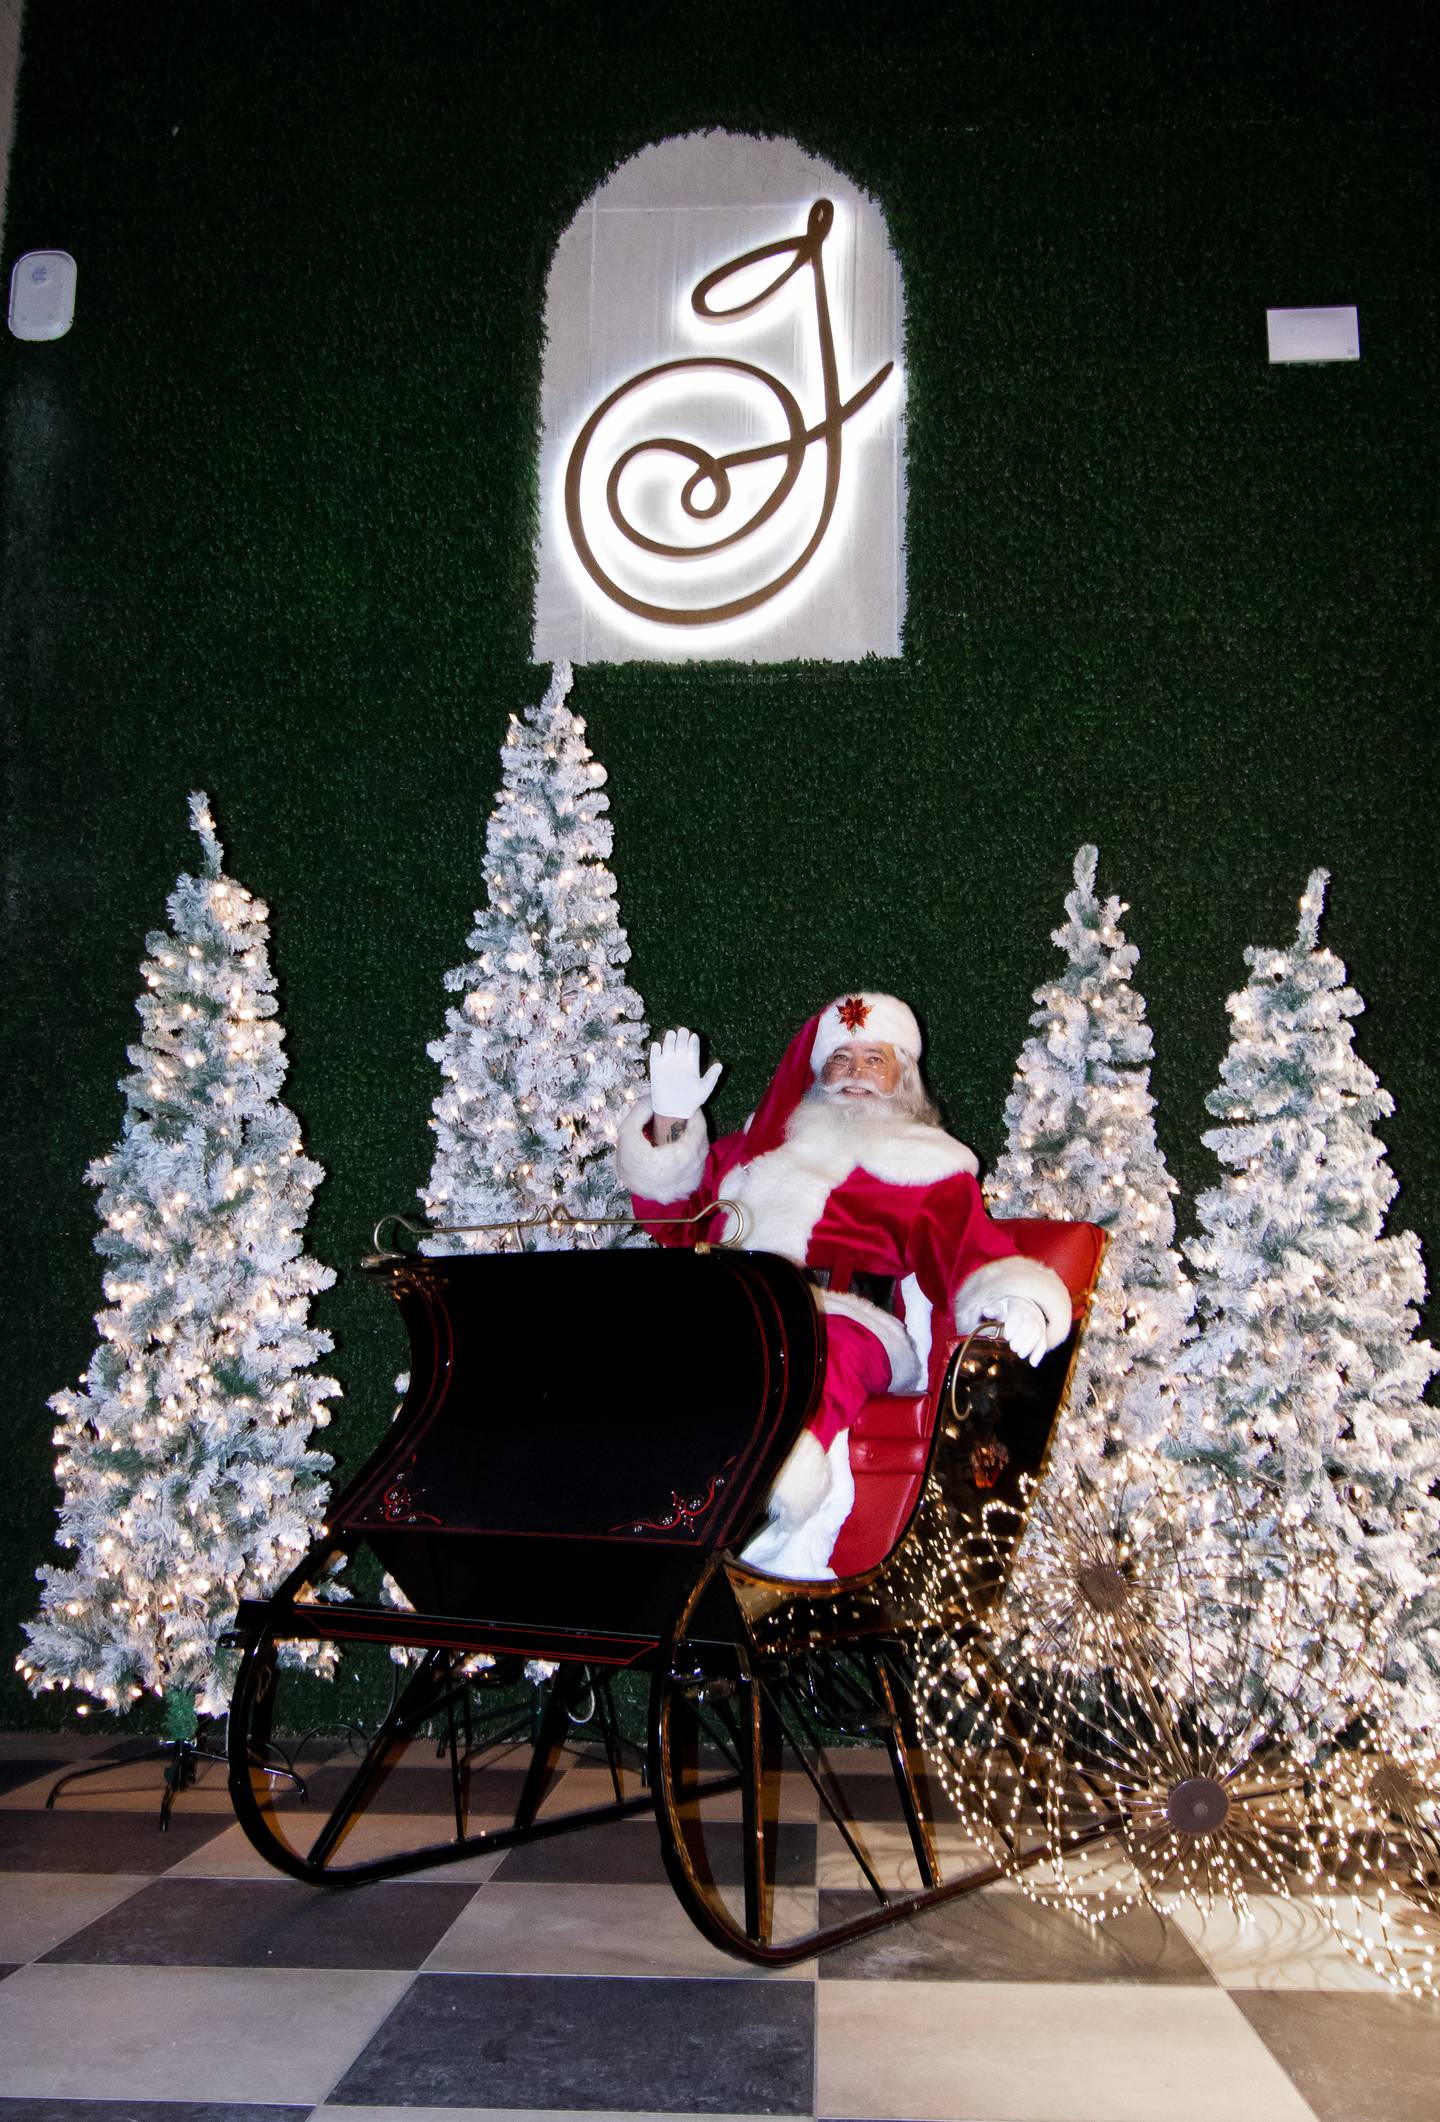 Santa Claus will make an appearance at The Graceful Ordinary in St. Charles Dec. 9, 2023 for photo opportunities in his festive sleigh on the outdoor patio.